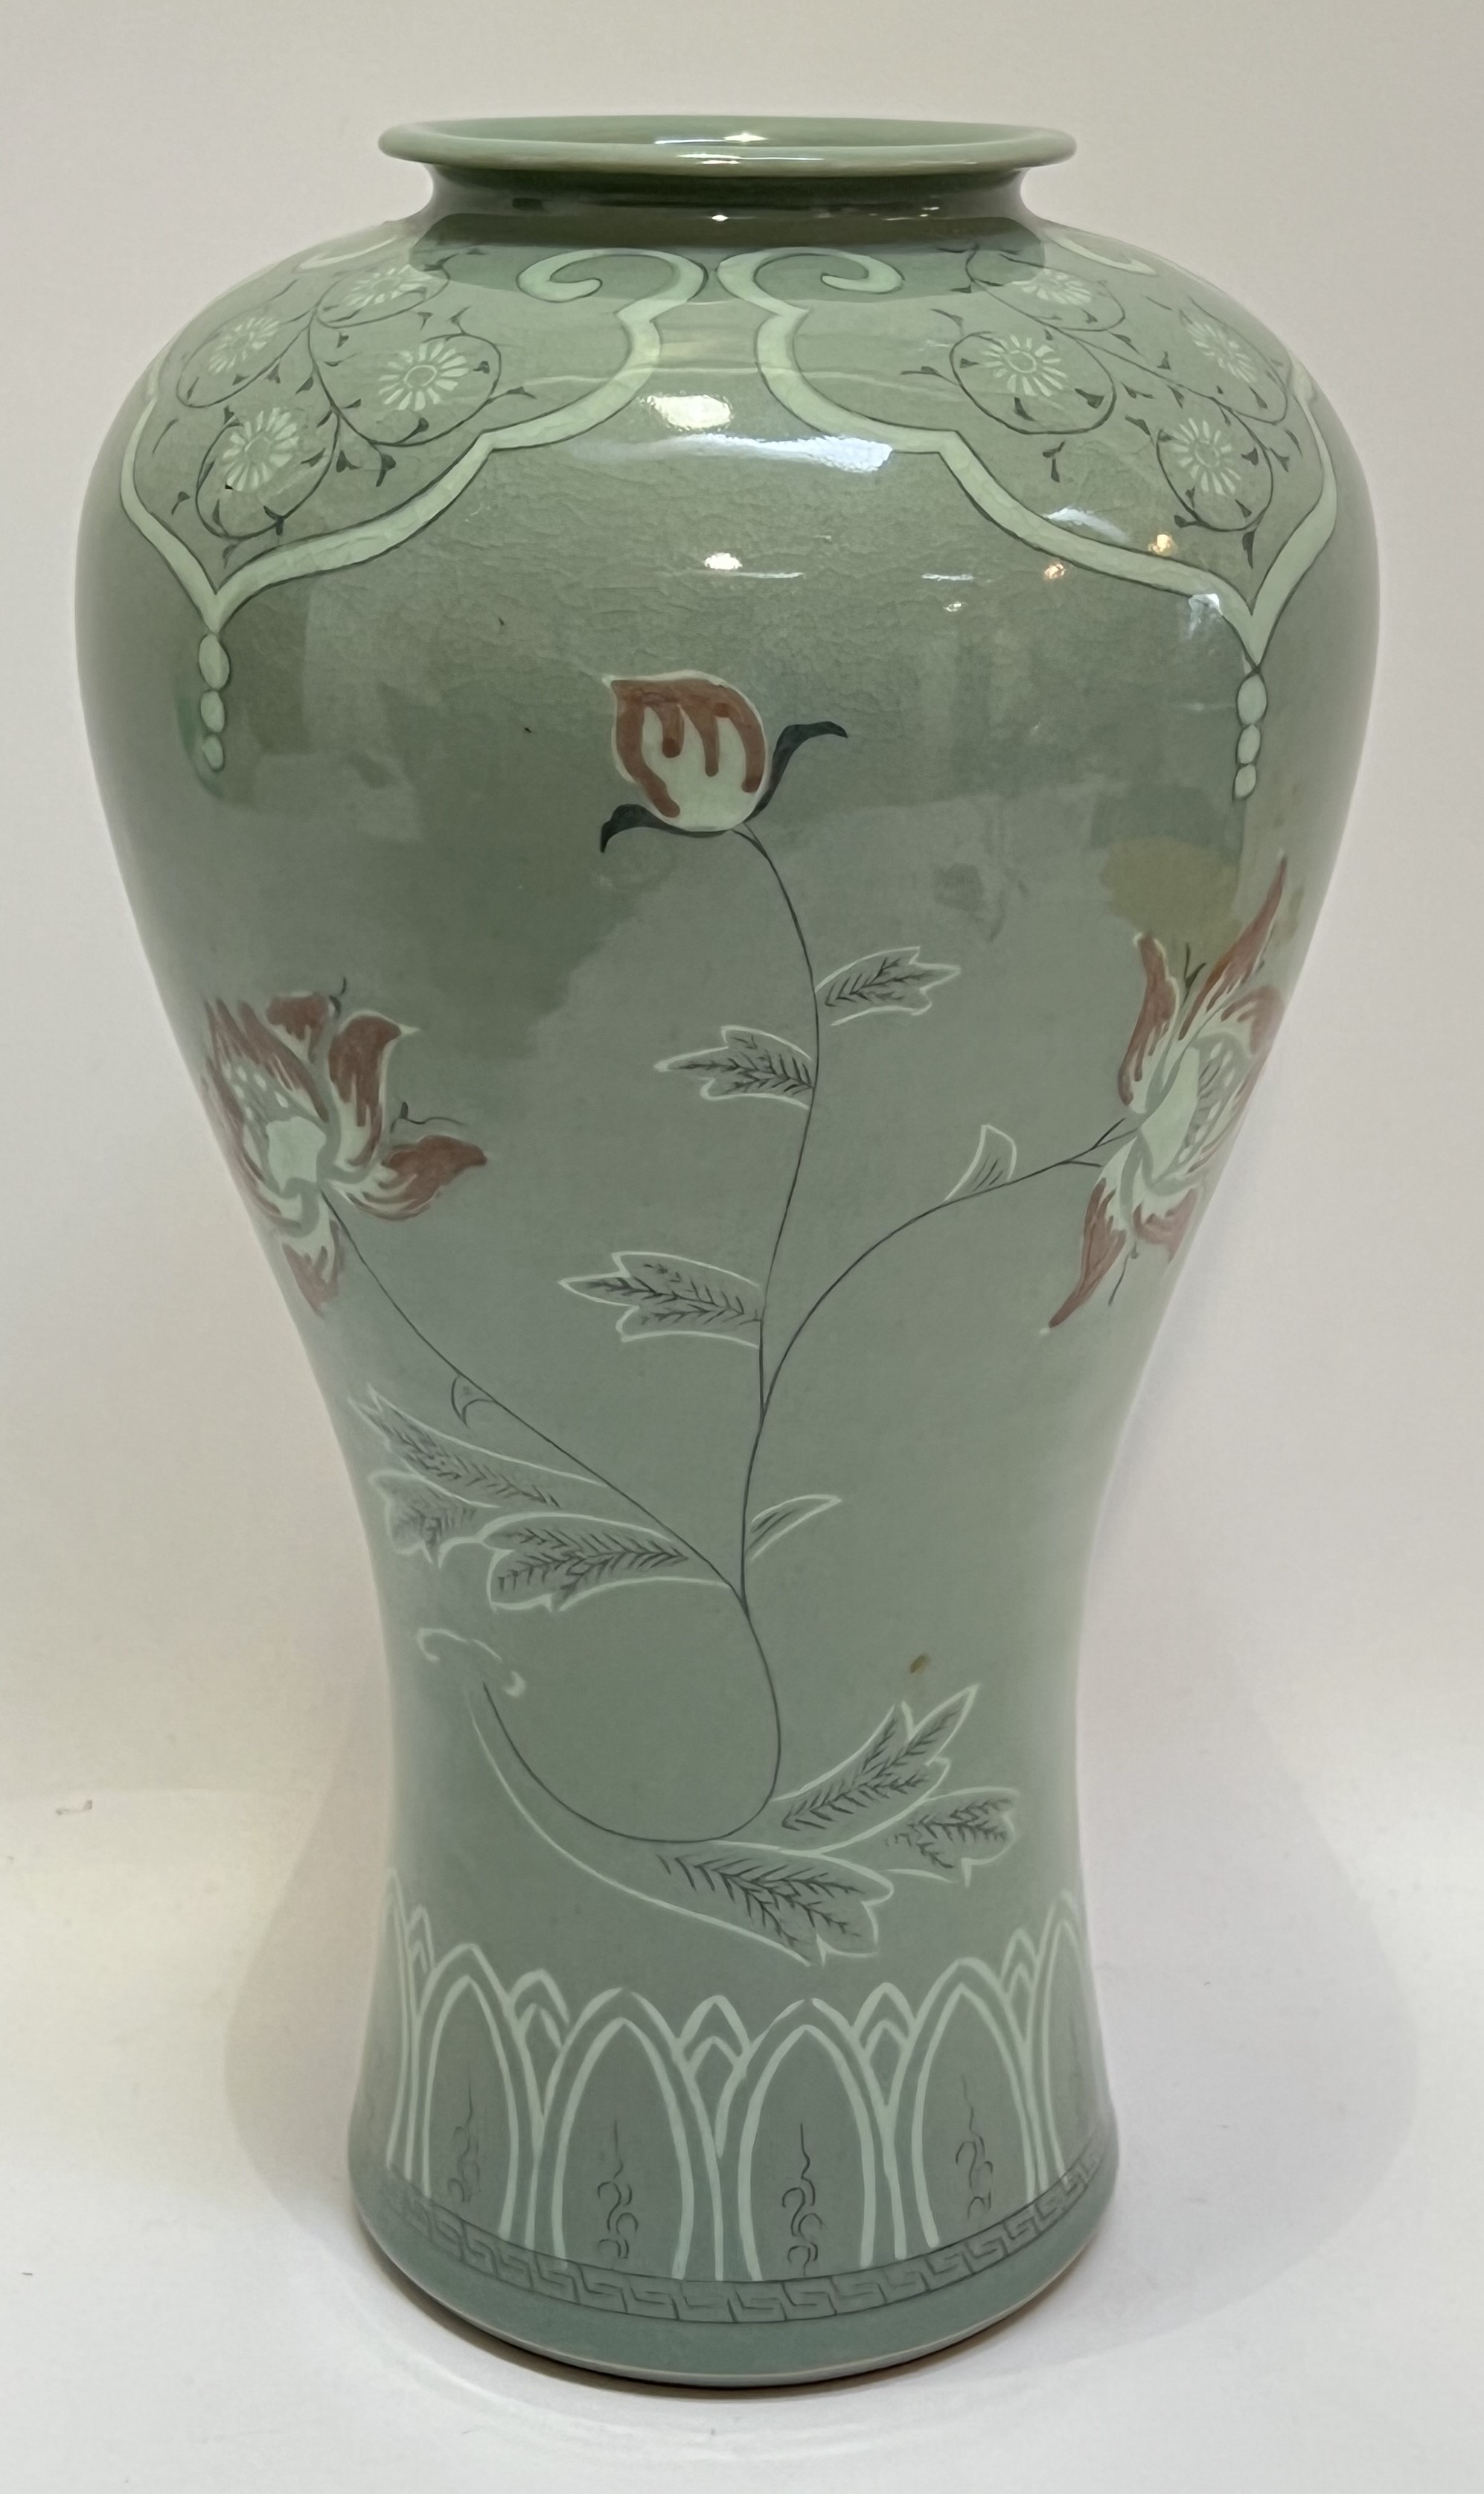 A large Korean celadon maebyeong/meiping vase with copper-red underglaze decoration of peonies and